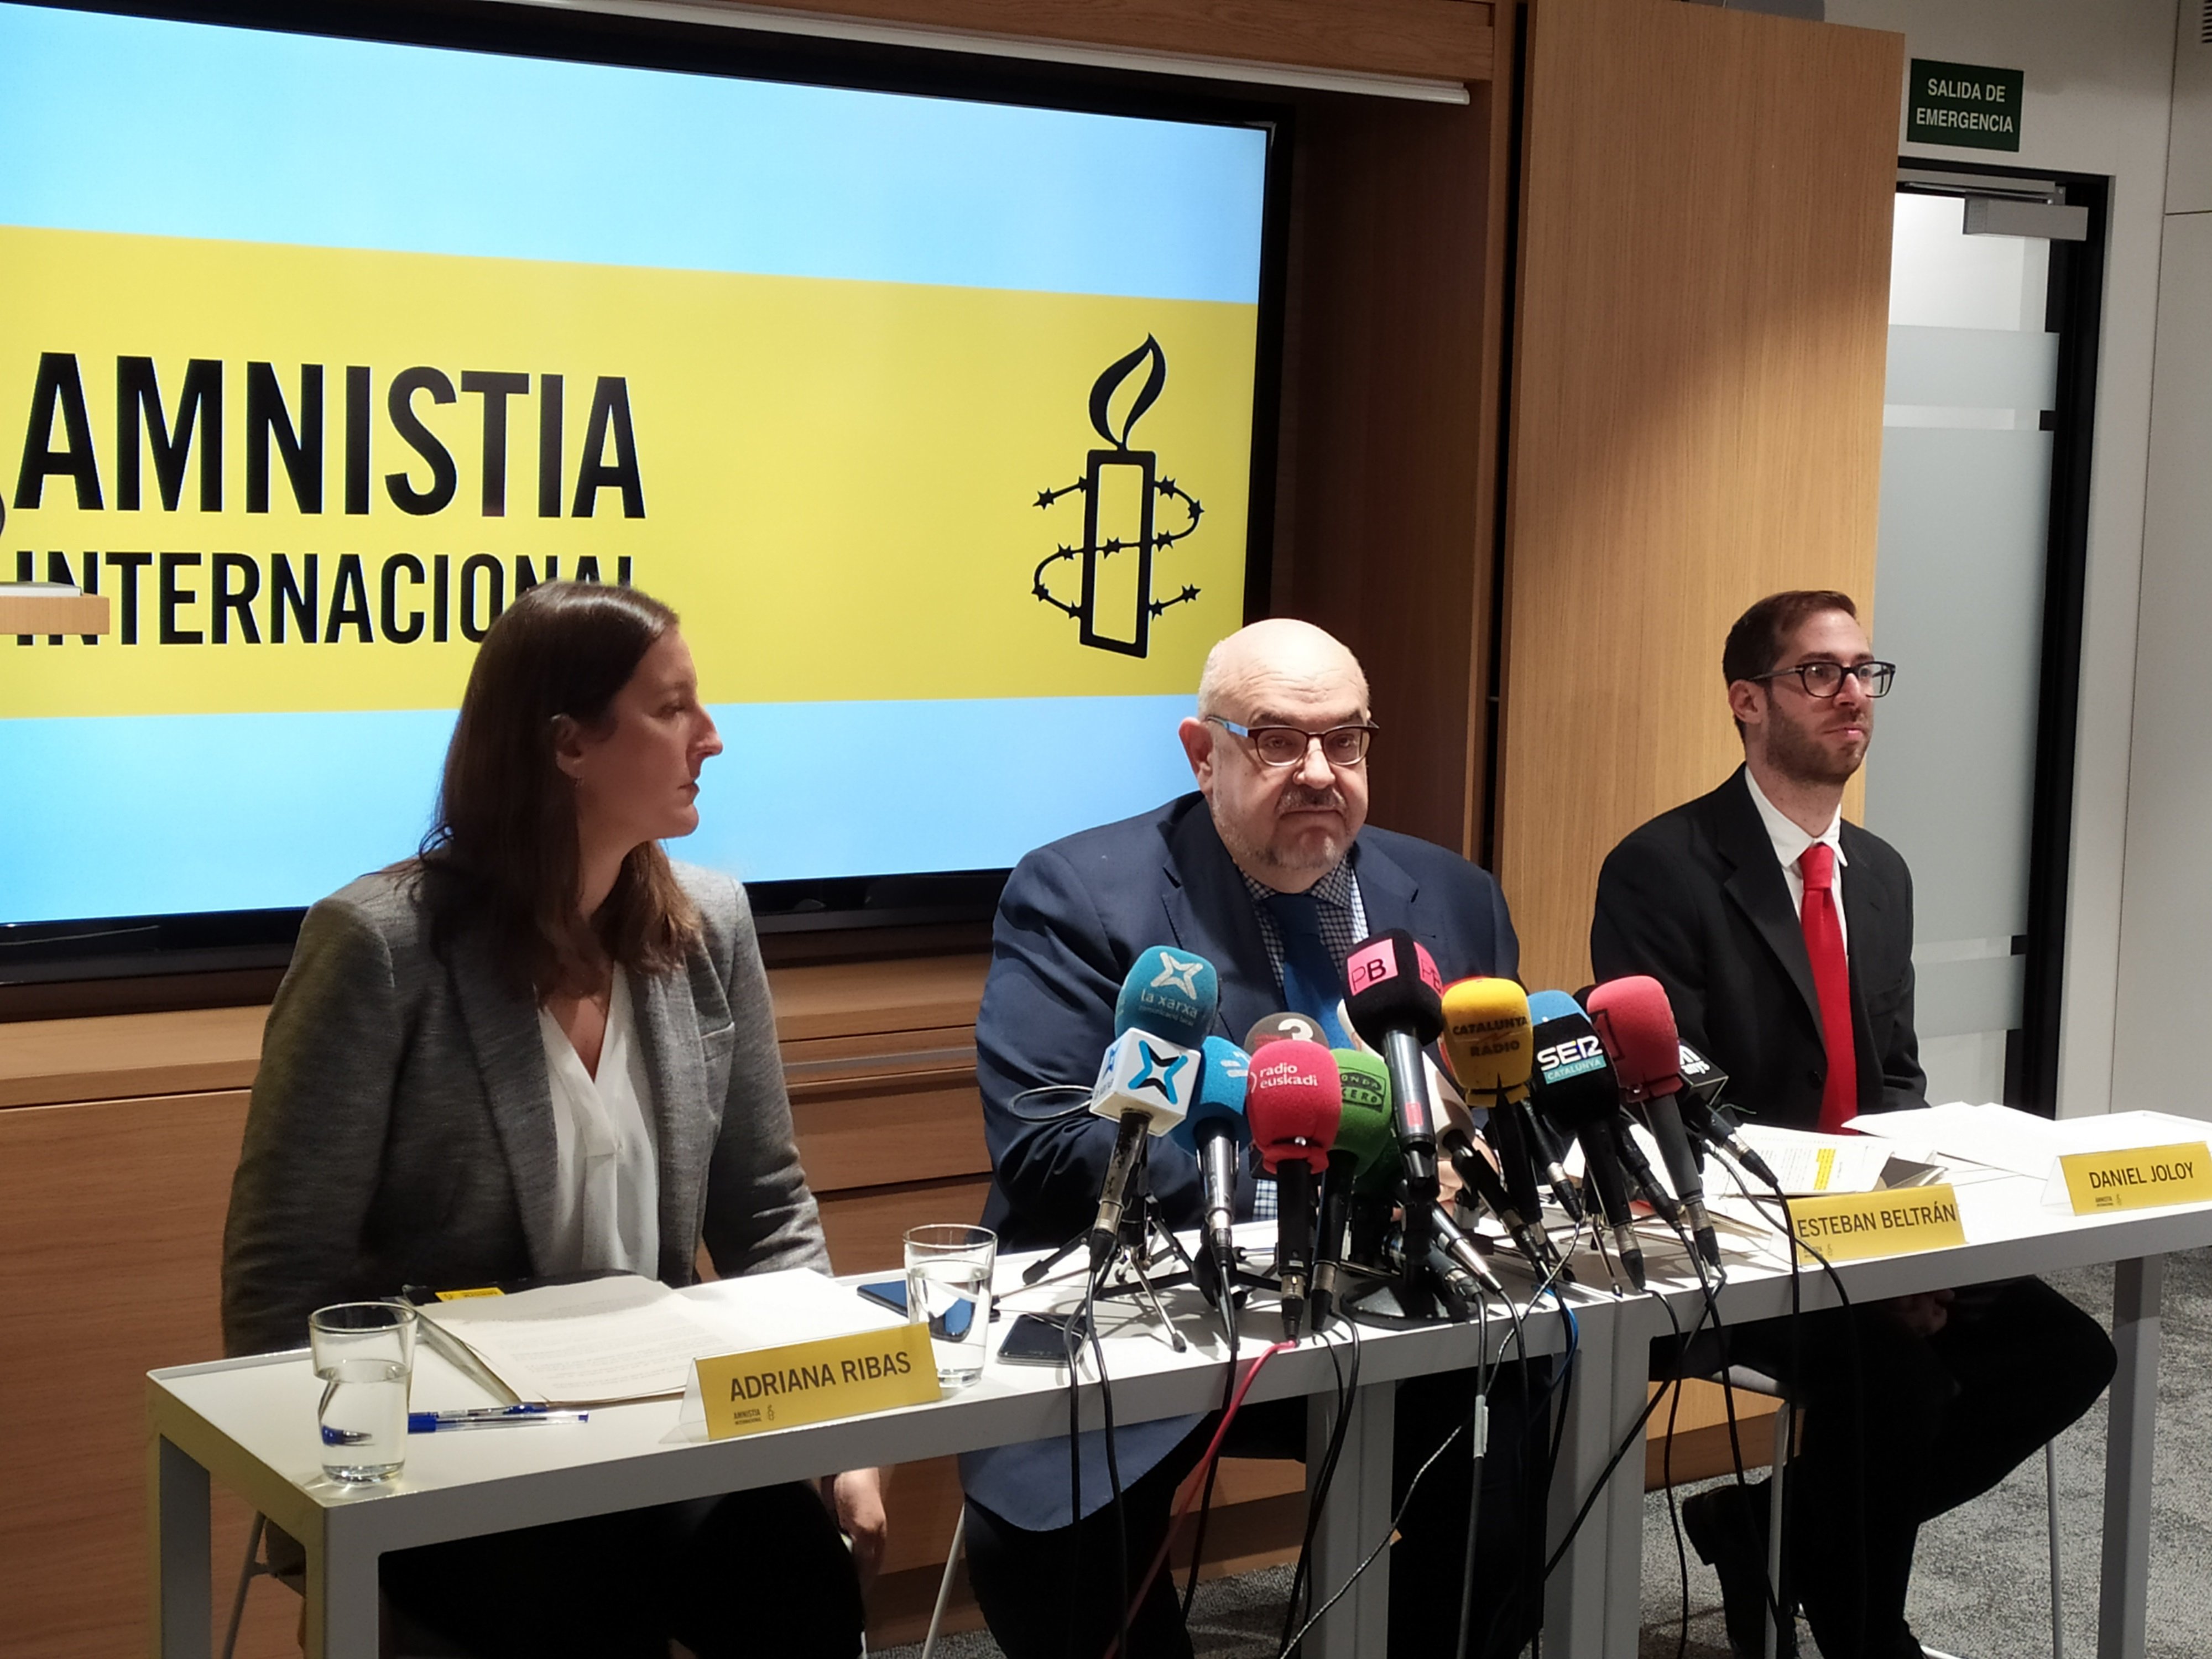 Amnesty International calls for changes in Spain in the wake of Valtònyc's ruling